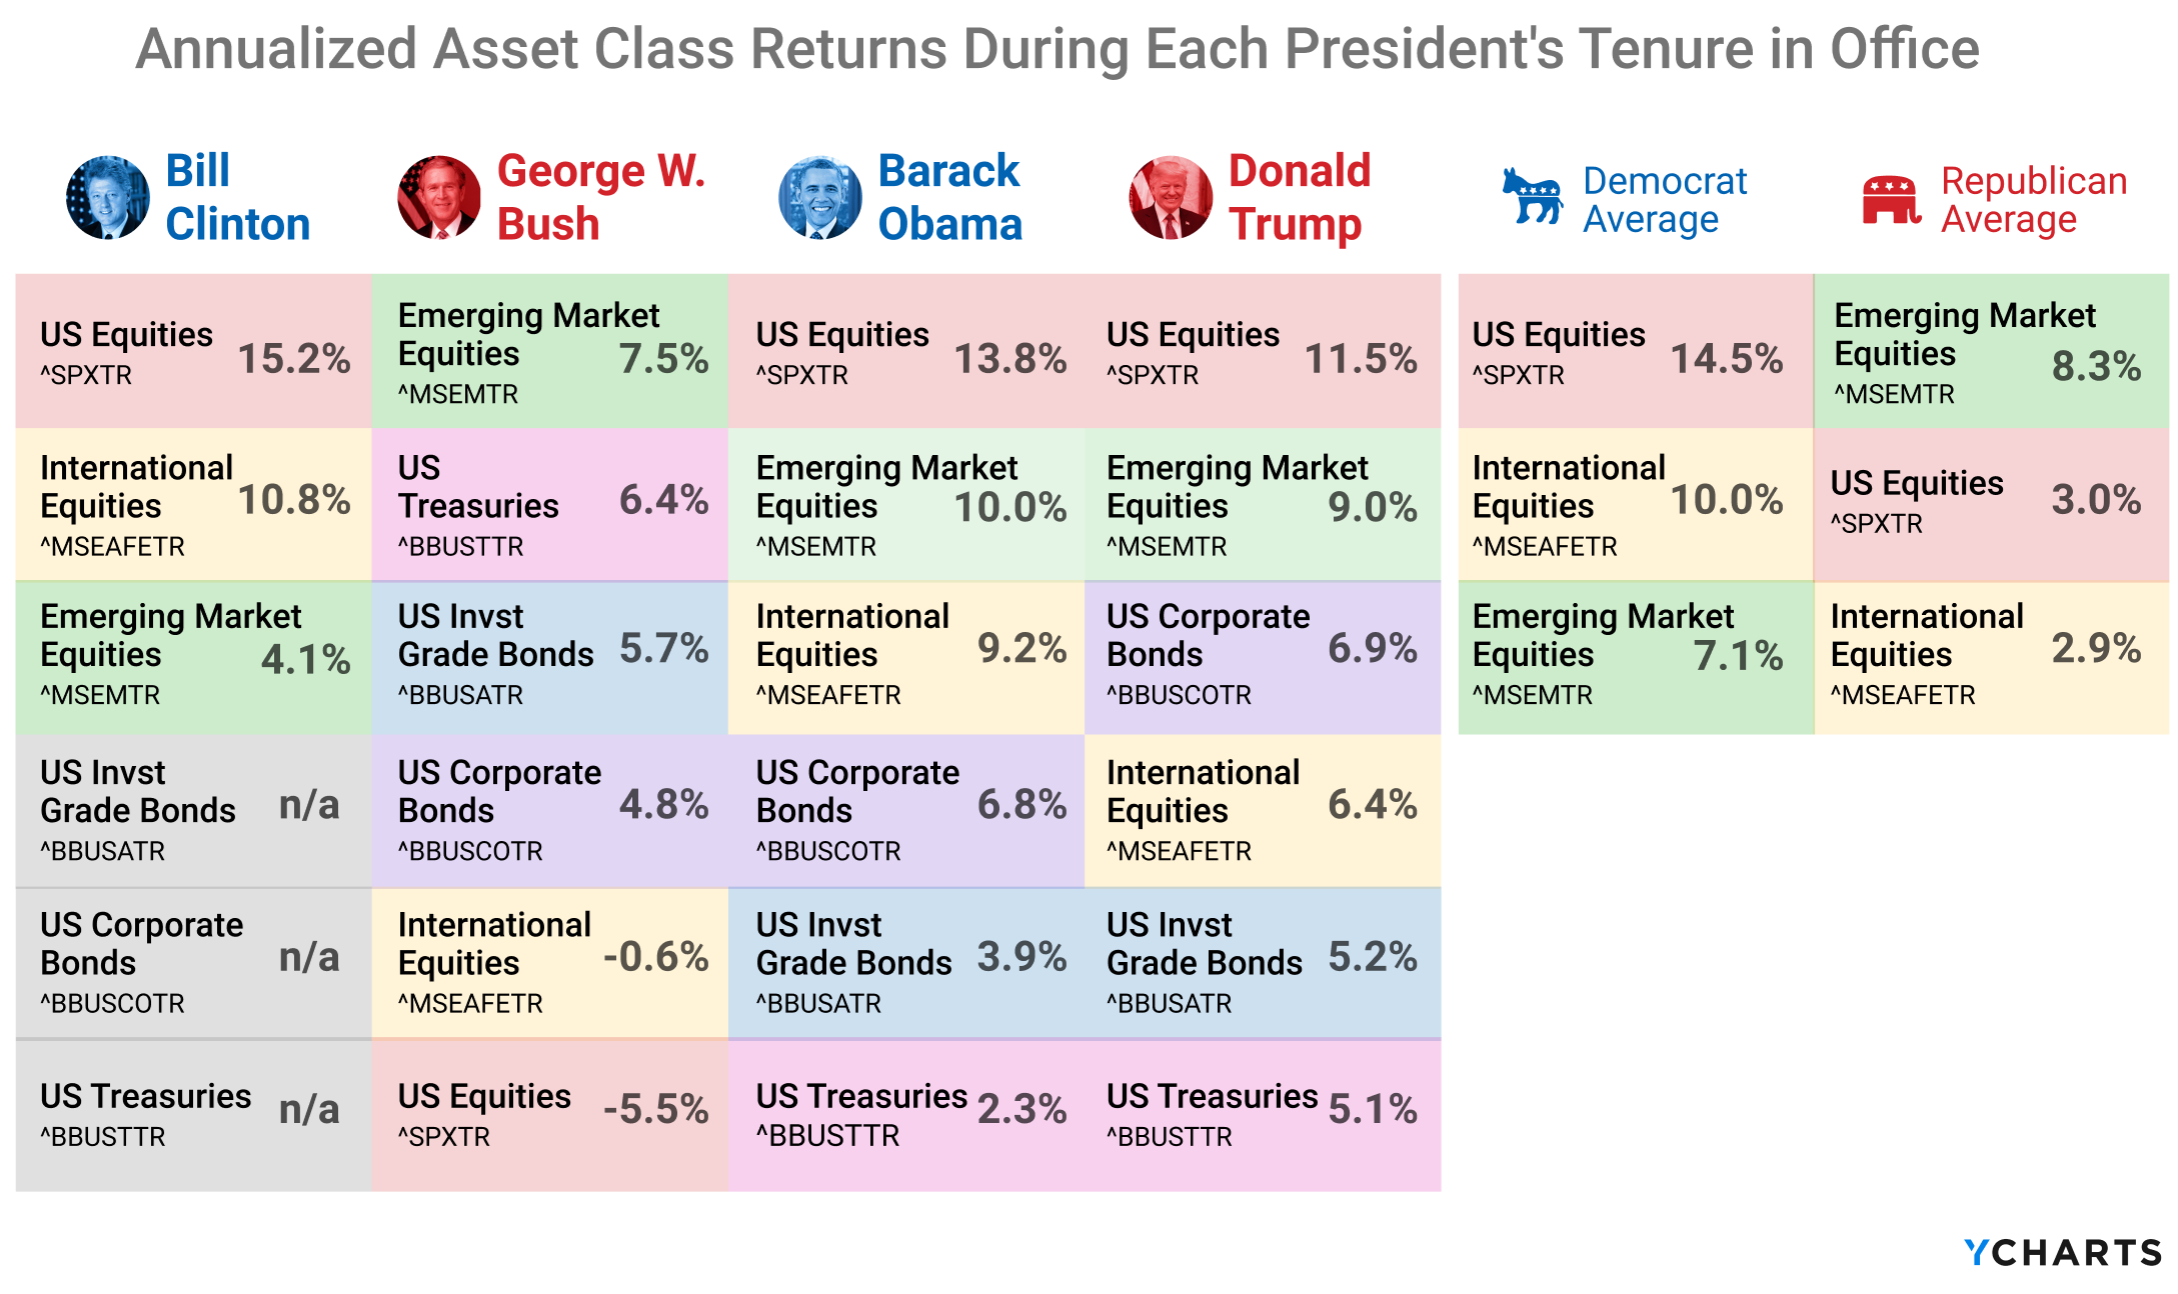 Annualized Asset Class Returns During Each President's First Tenure in Office